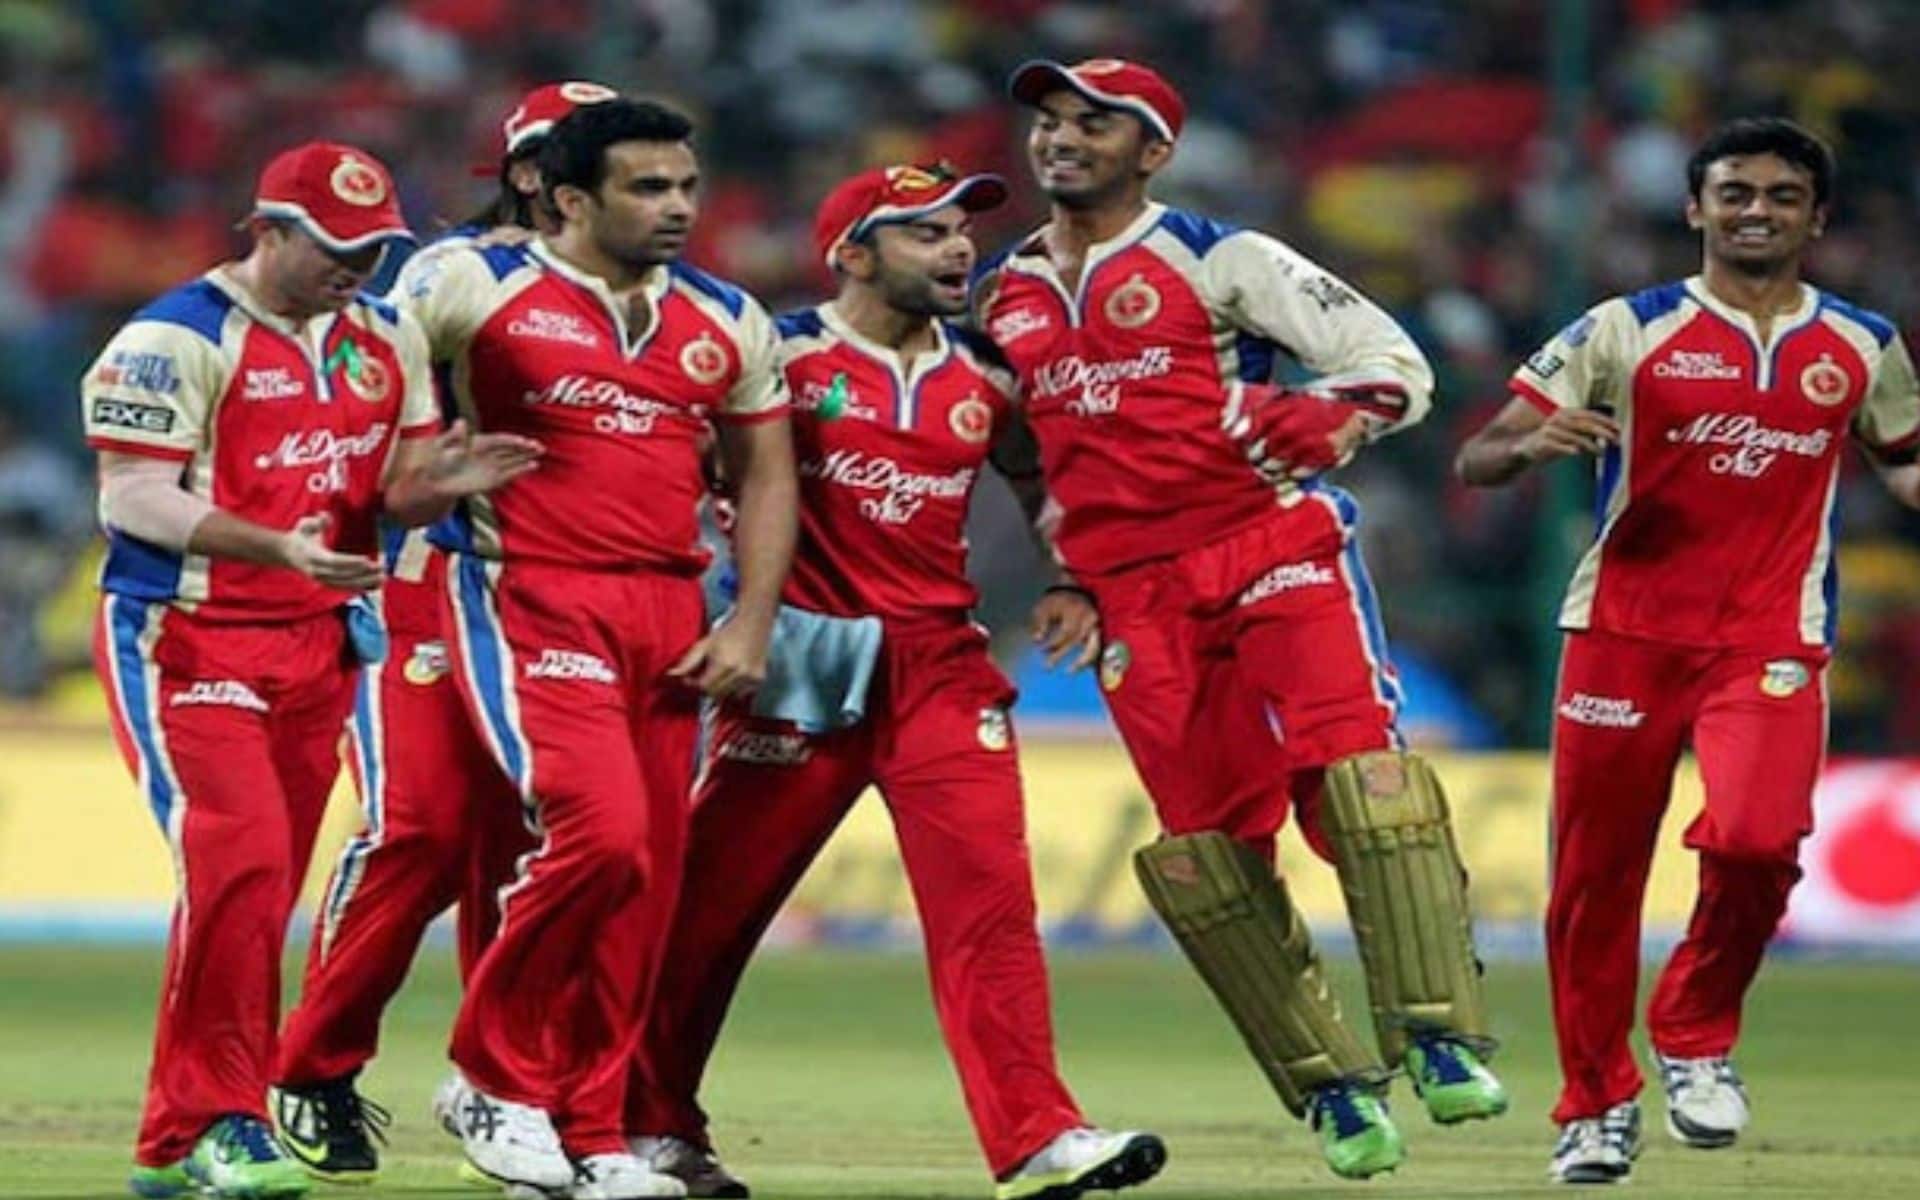 RCB reached their highest team total with 263/5 [x.com]